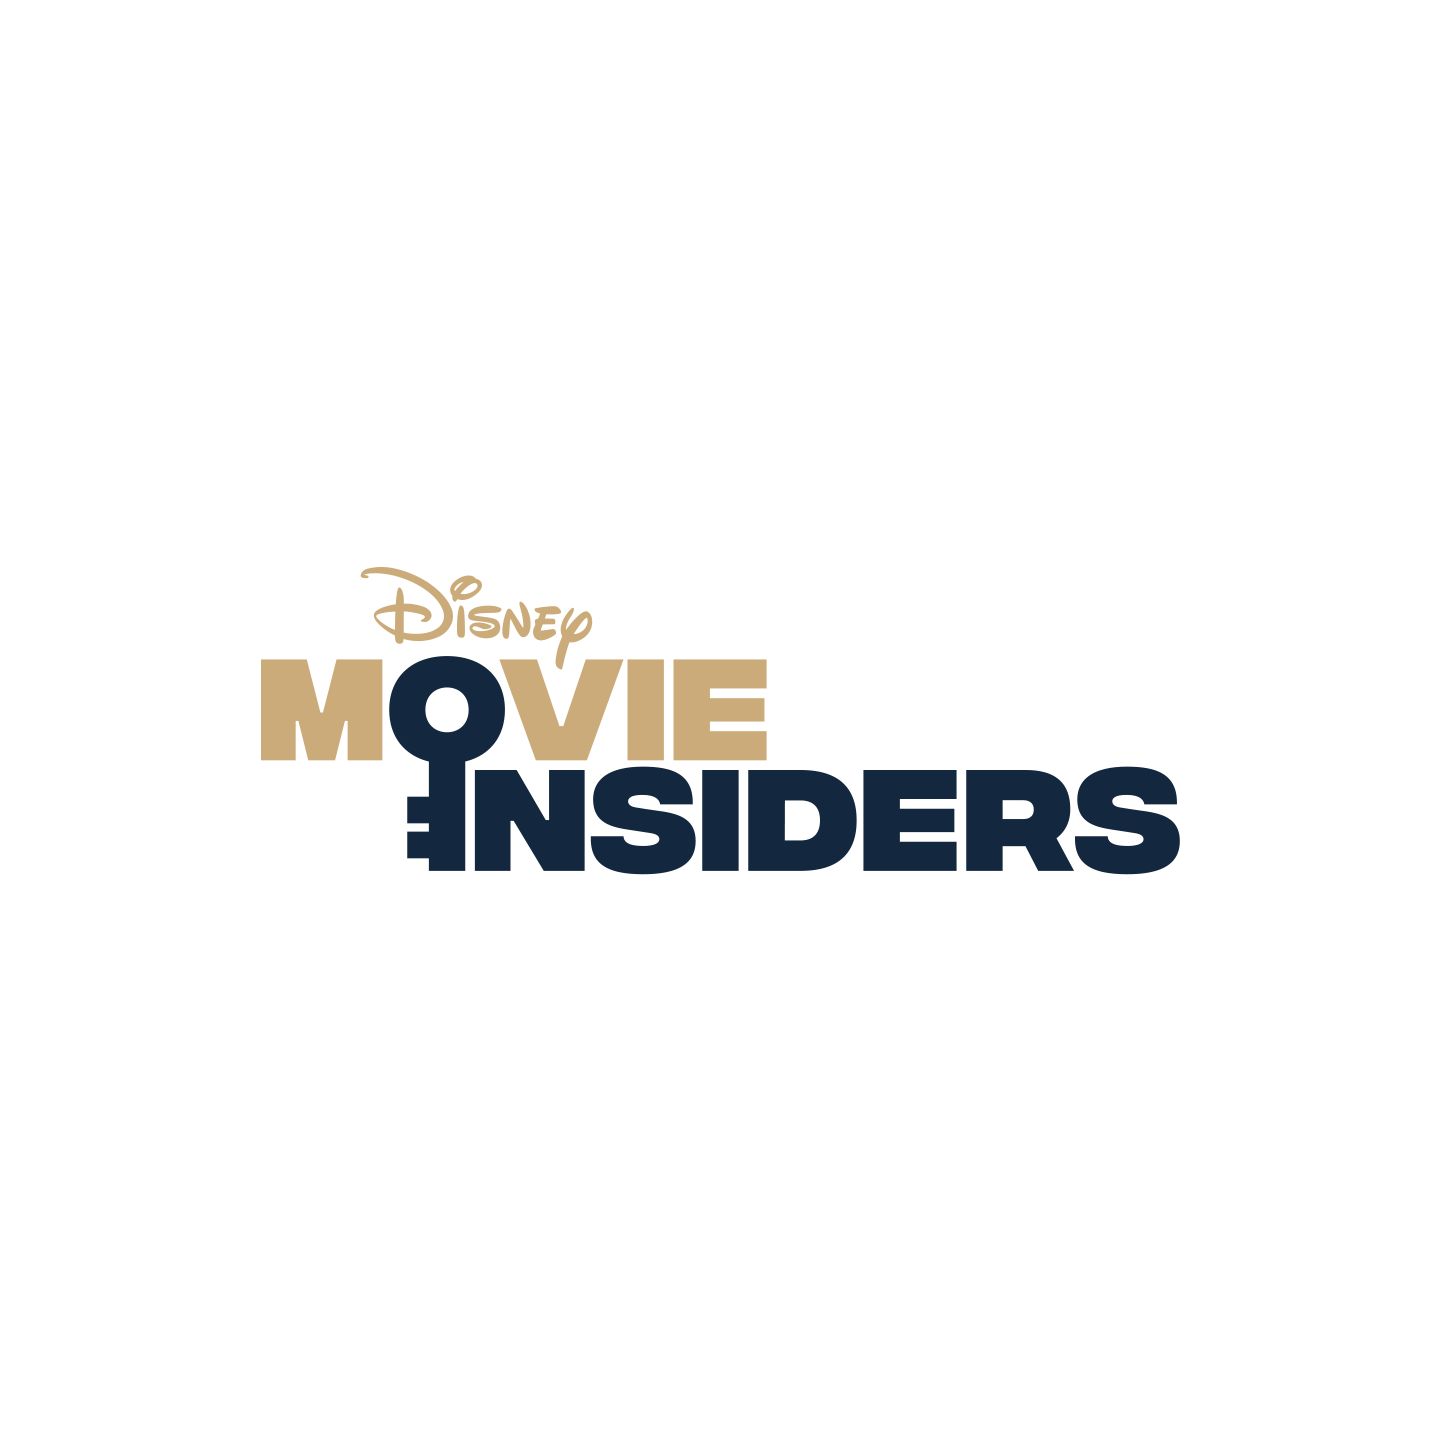 Disney Movie Insiders Presents - AN INSIDER LOOK AT FREE GUY - Joe Keery joins us to talk about Free Guy, life in Free City and his character Keys. LISTEN NOW